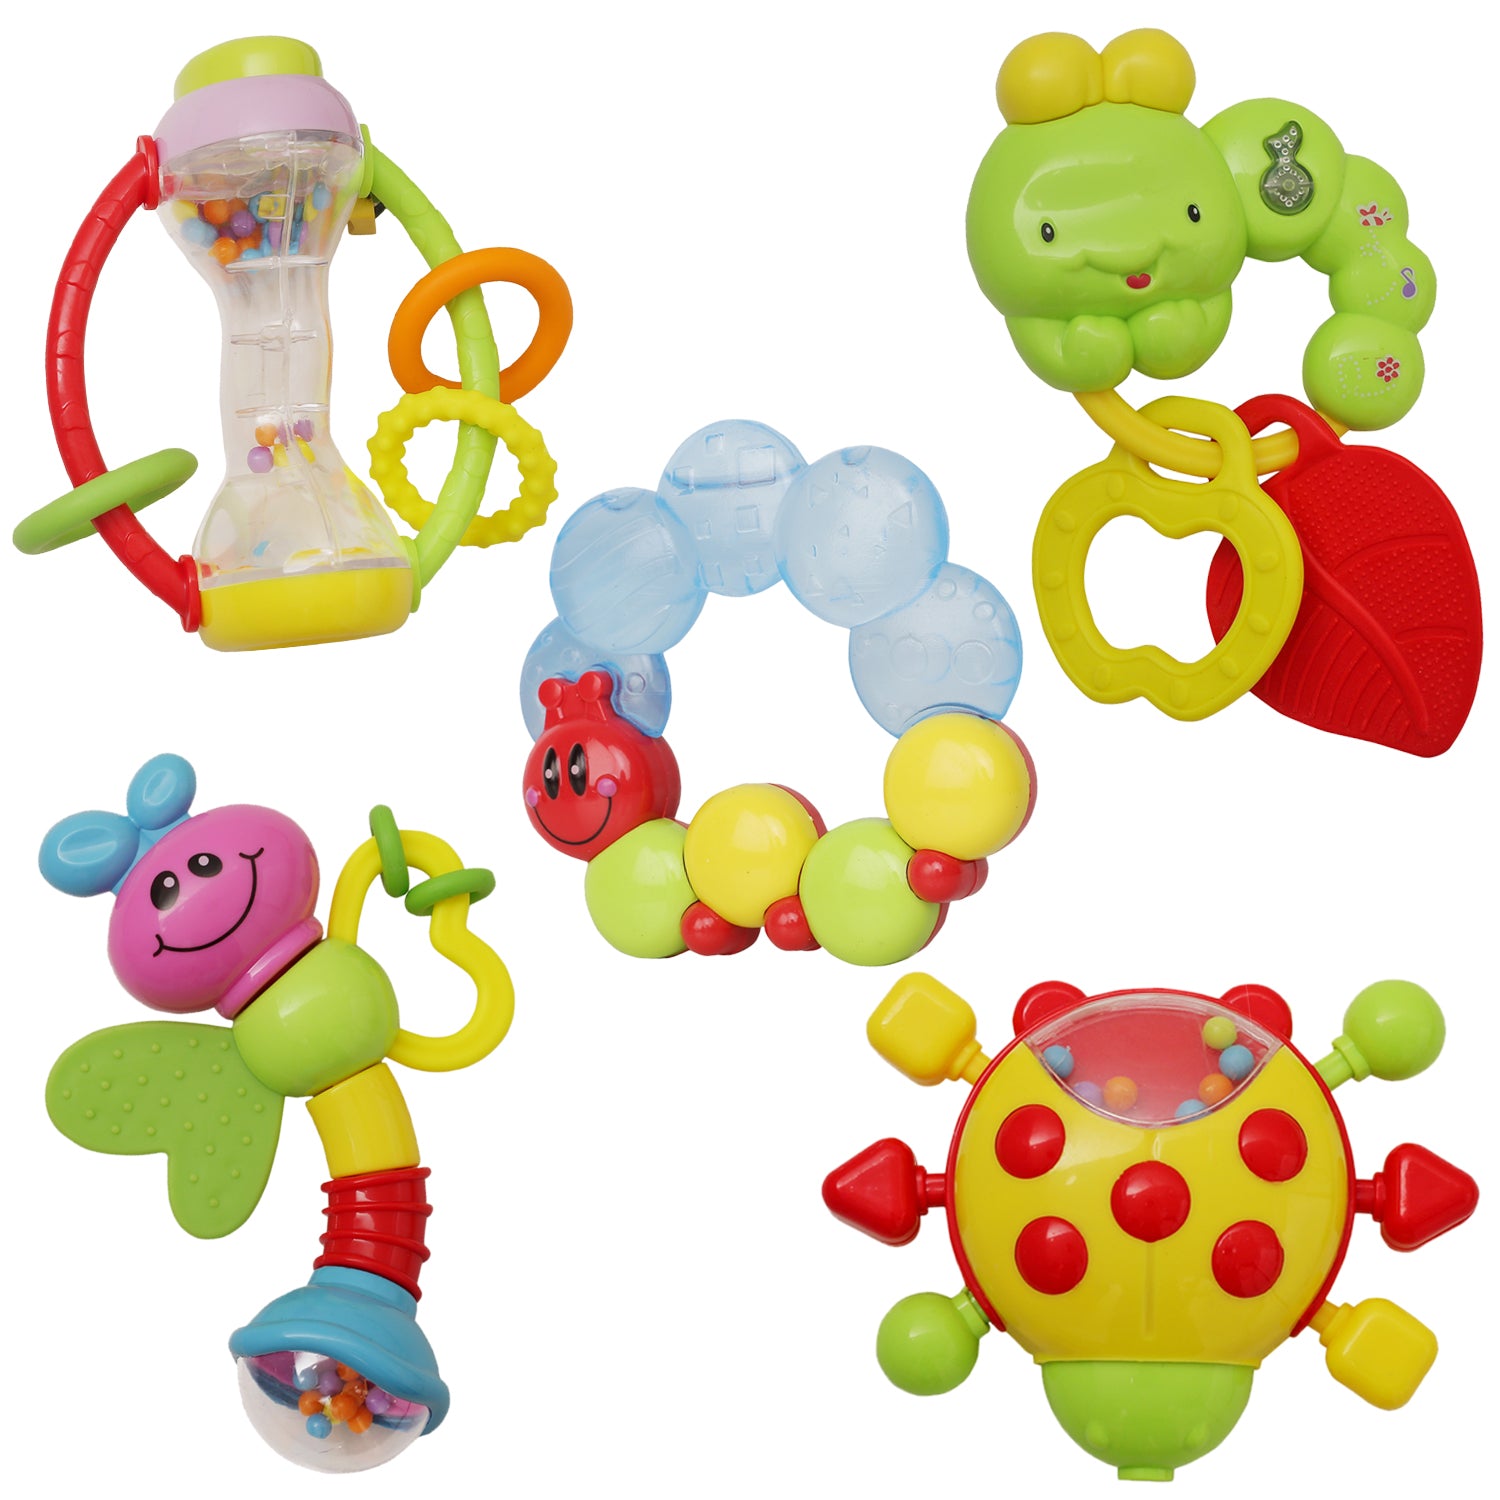 Premium Multicolour Set of 5 Musical Rattle Toys With Light